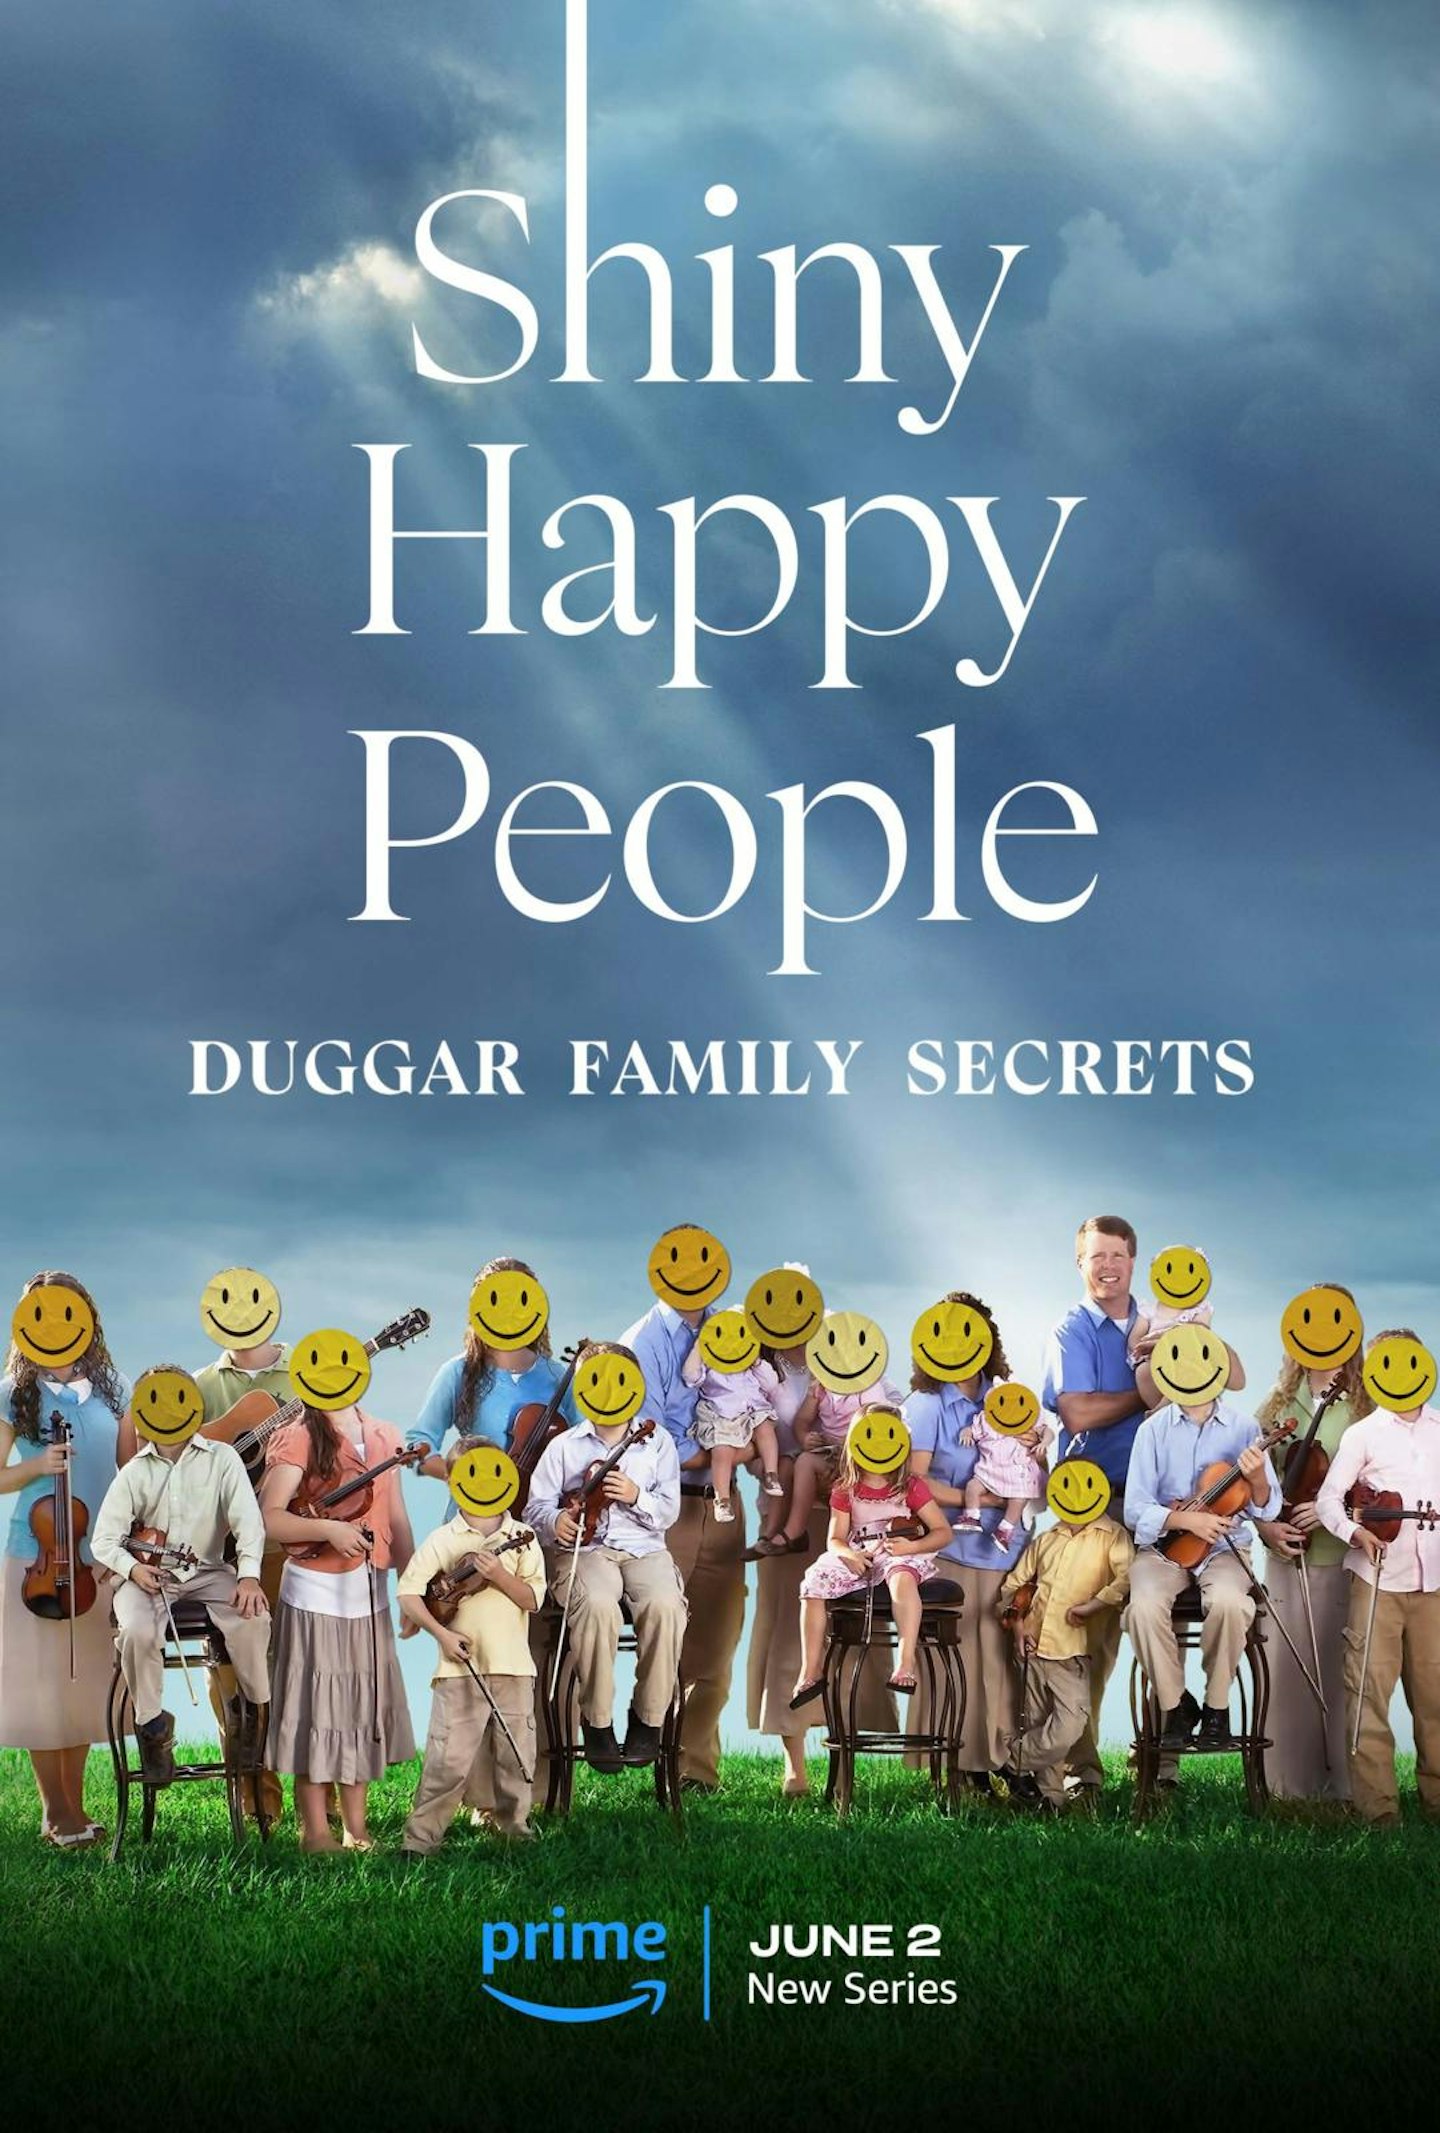 shiny happy people Duggar family secrets what to watch